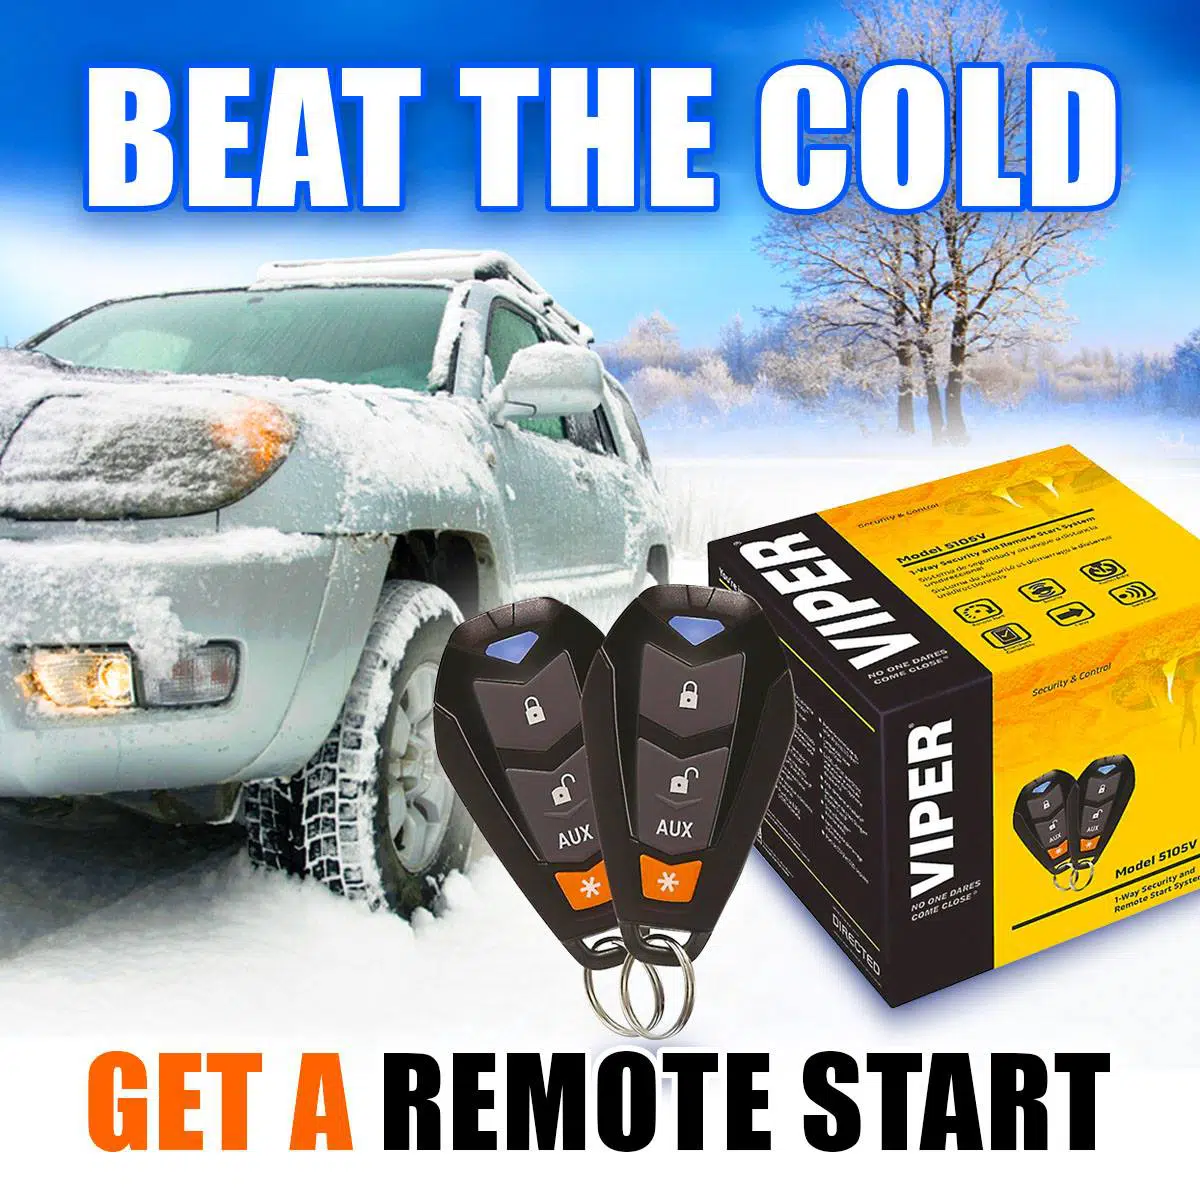 We sell and install Viper remote starters